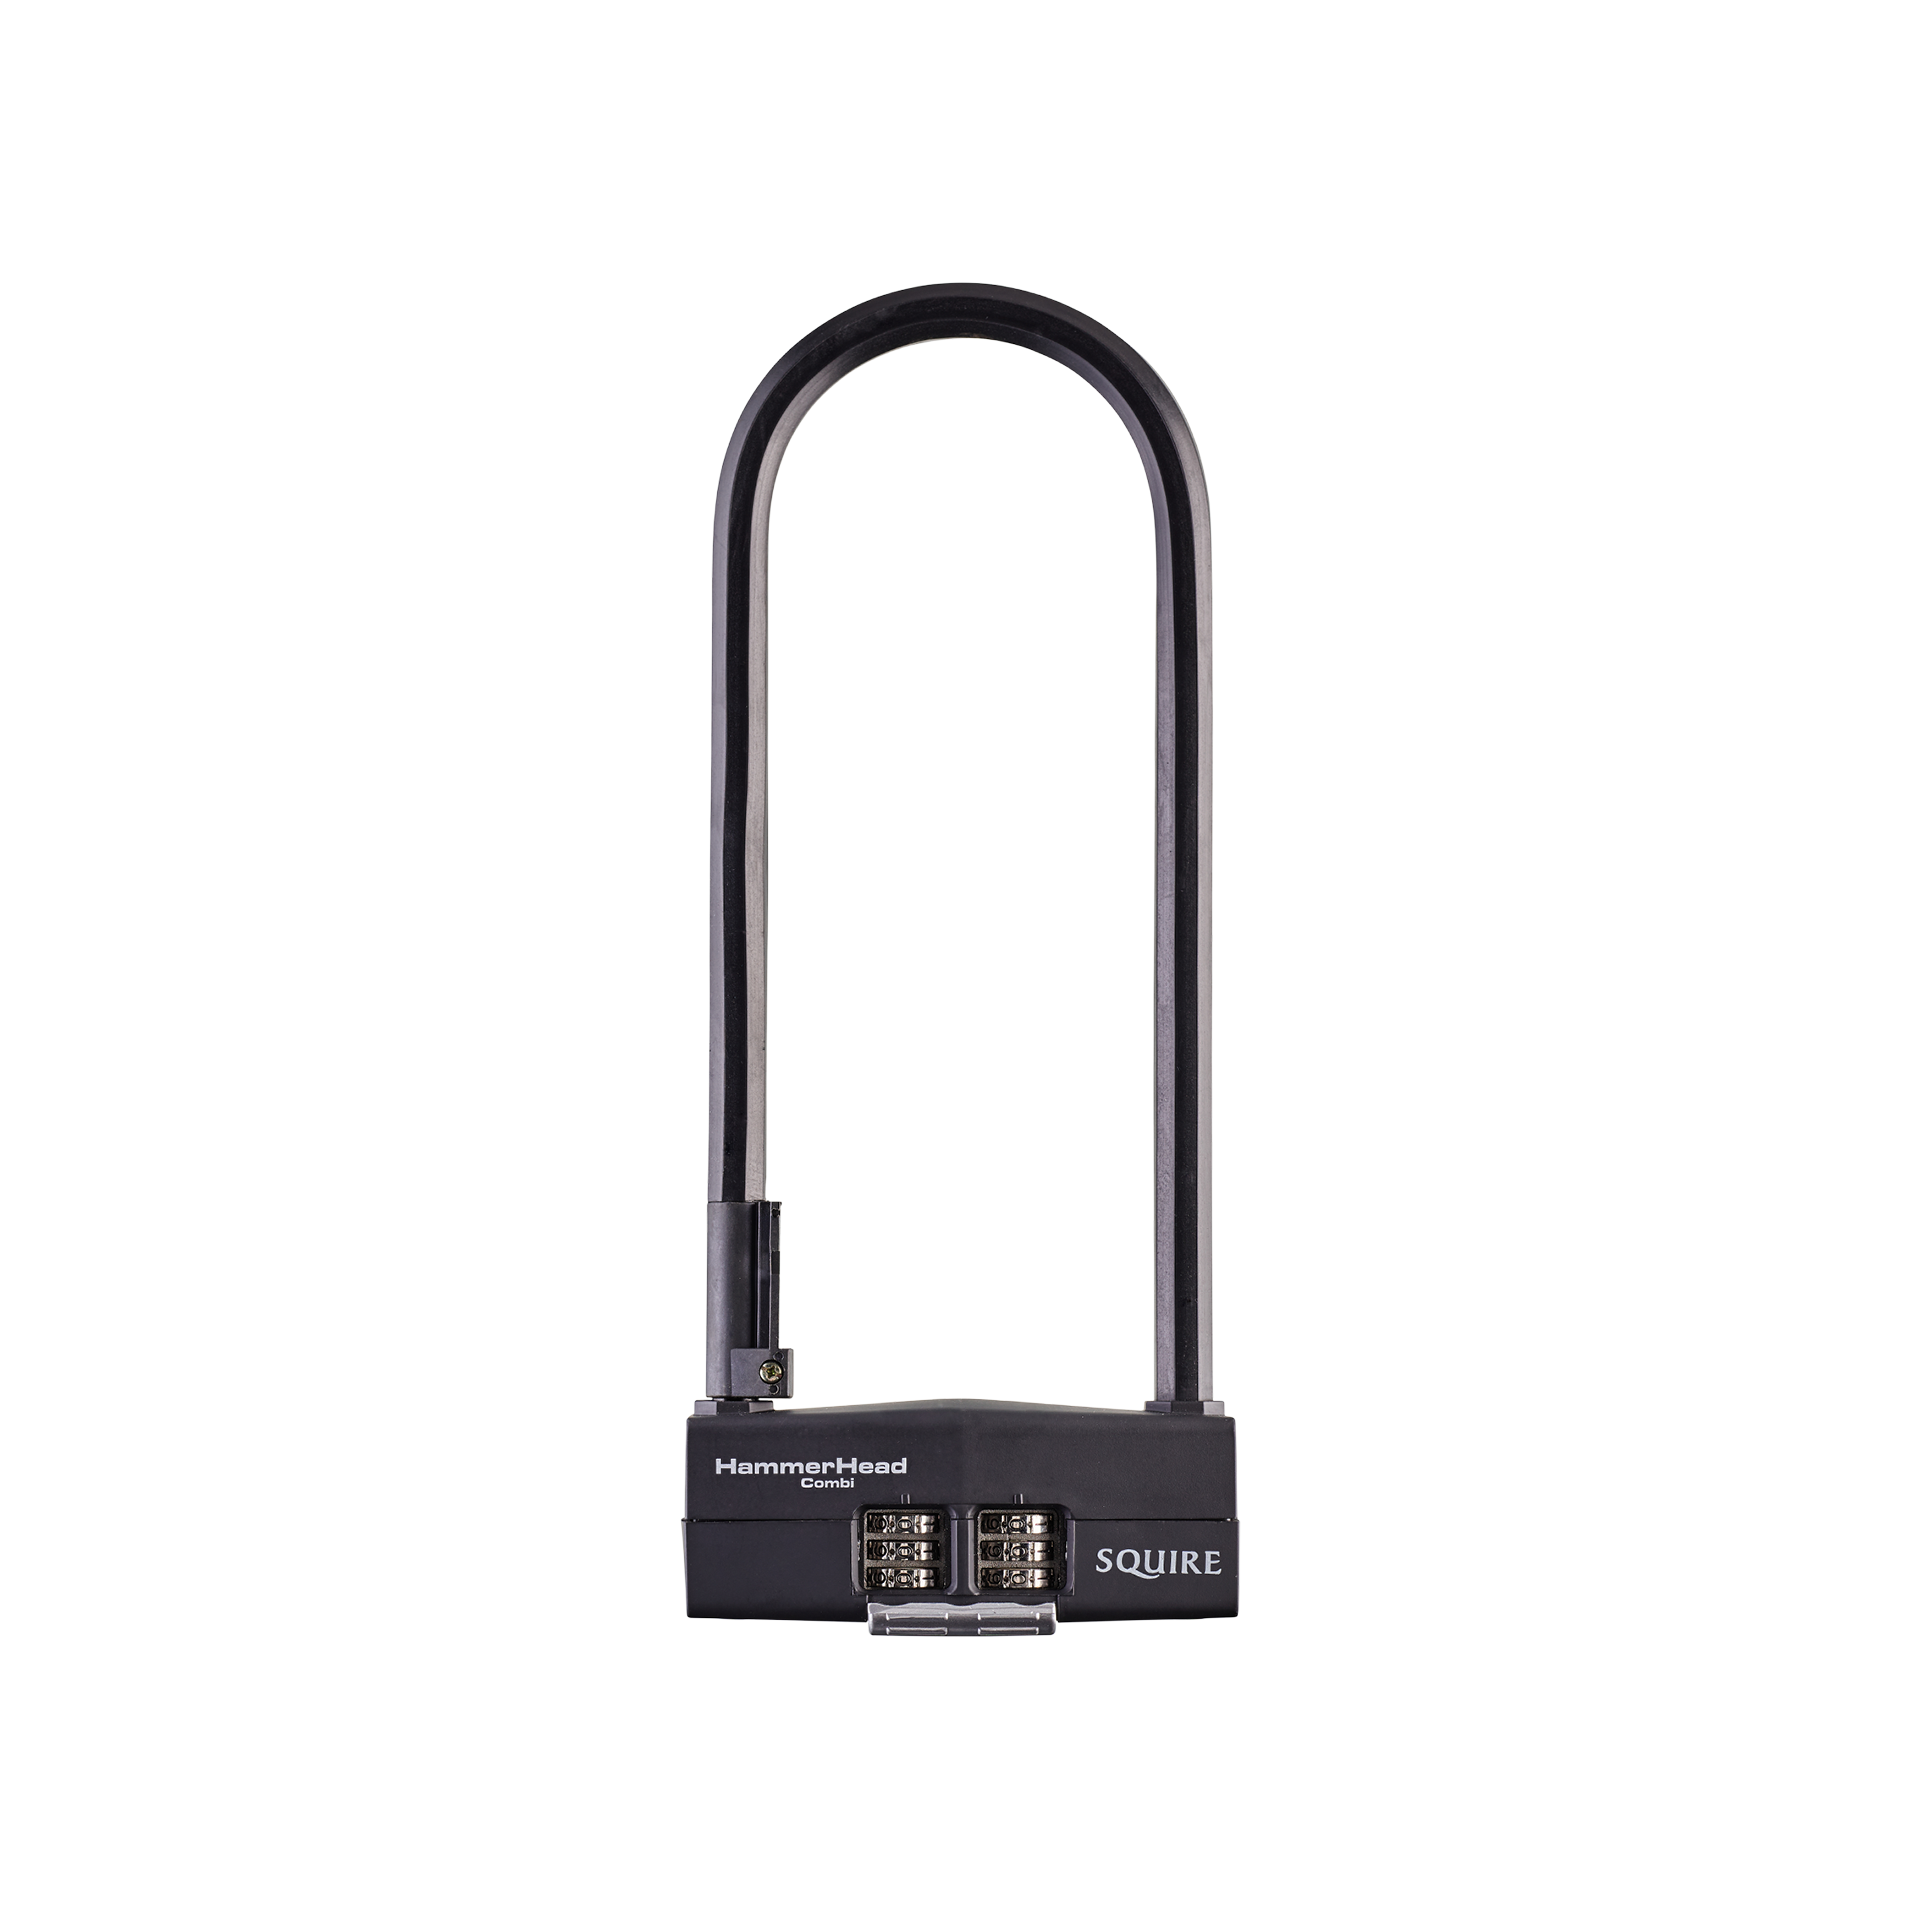 highly secure bicycle lock with bracket especially suitable for commuters padlock cyclists and in town use SQUIRE HAMMERHEAD ™ COMBI 290